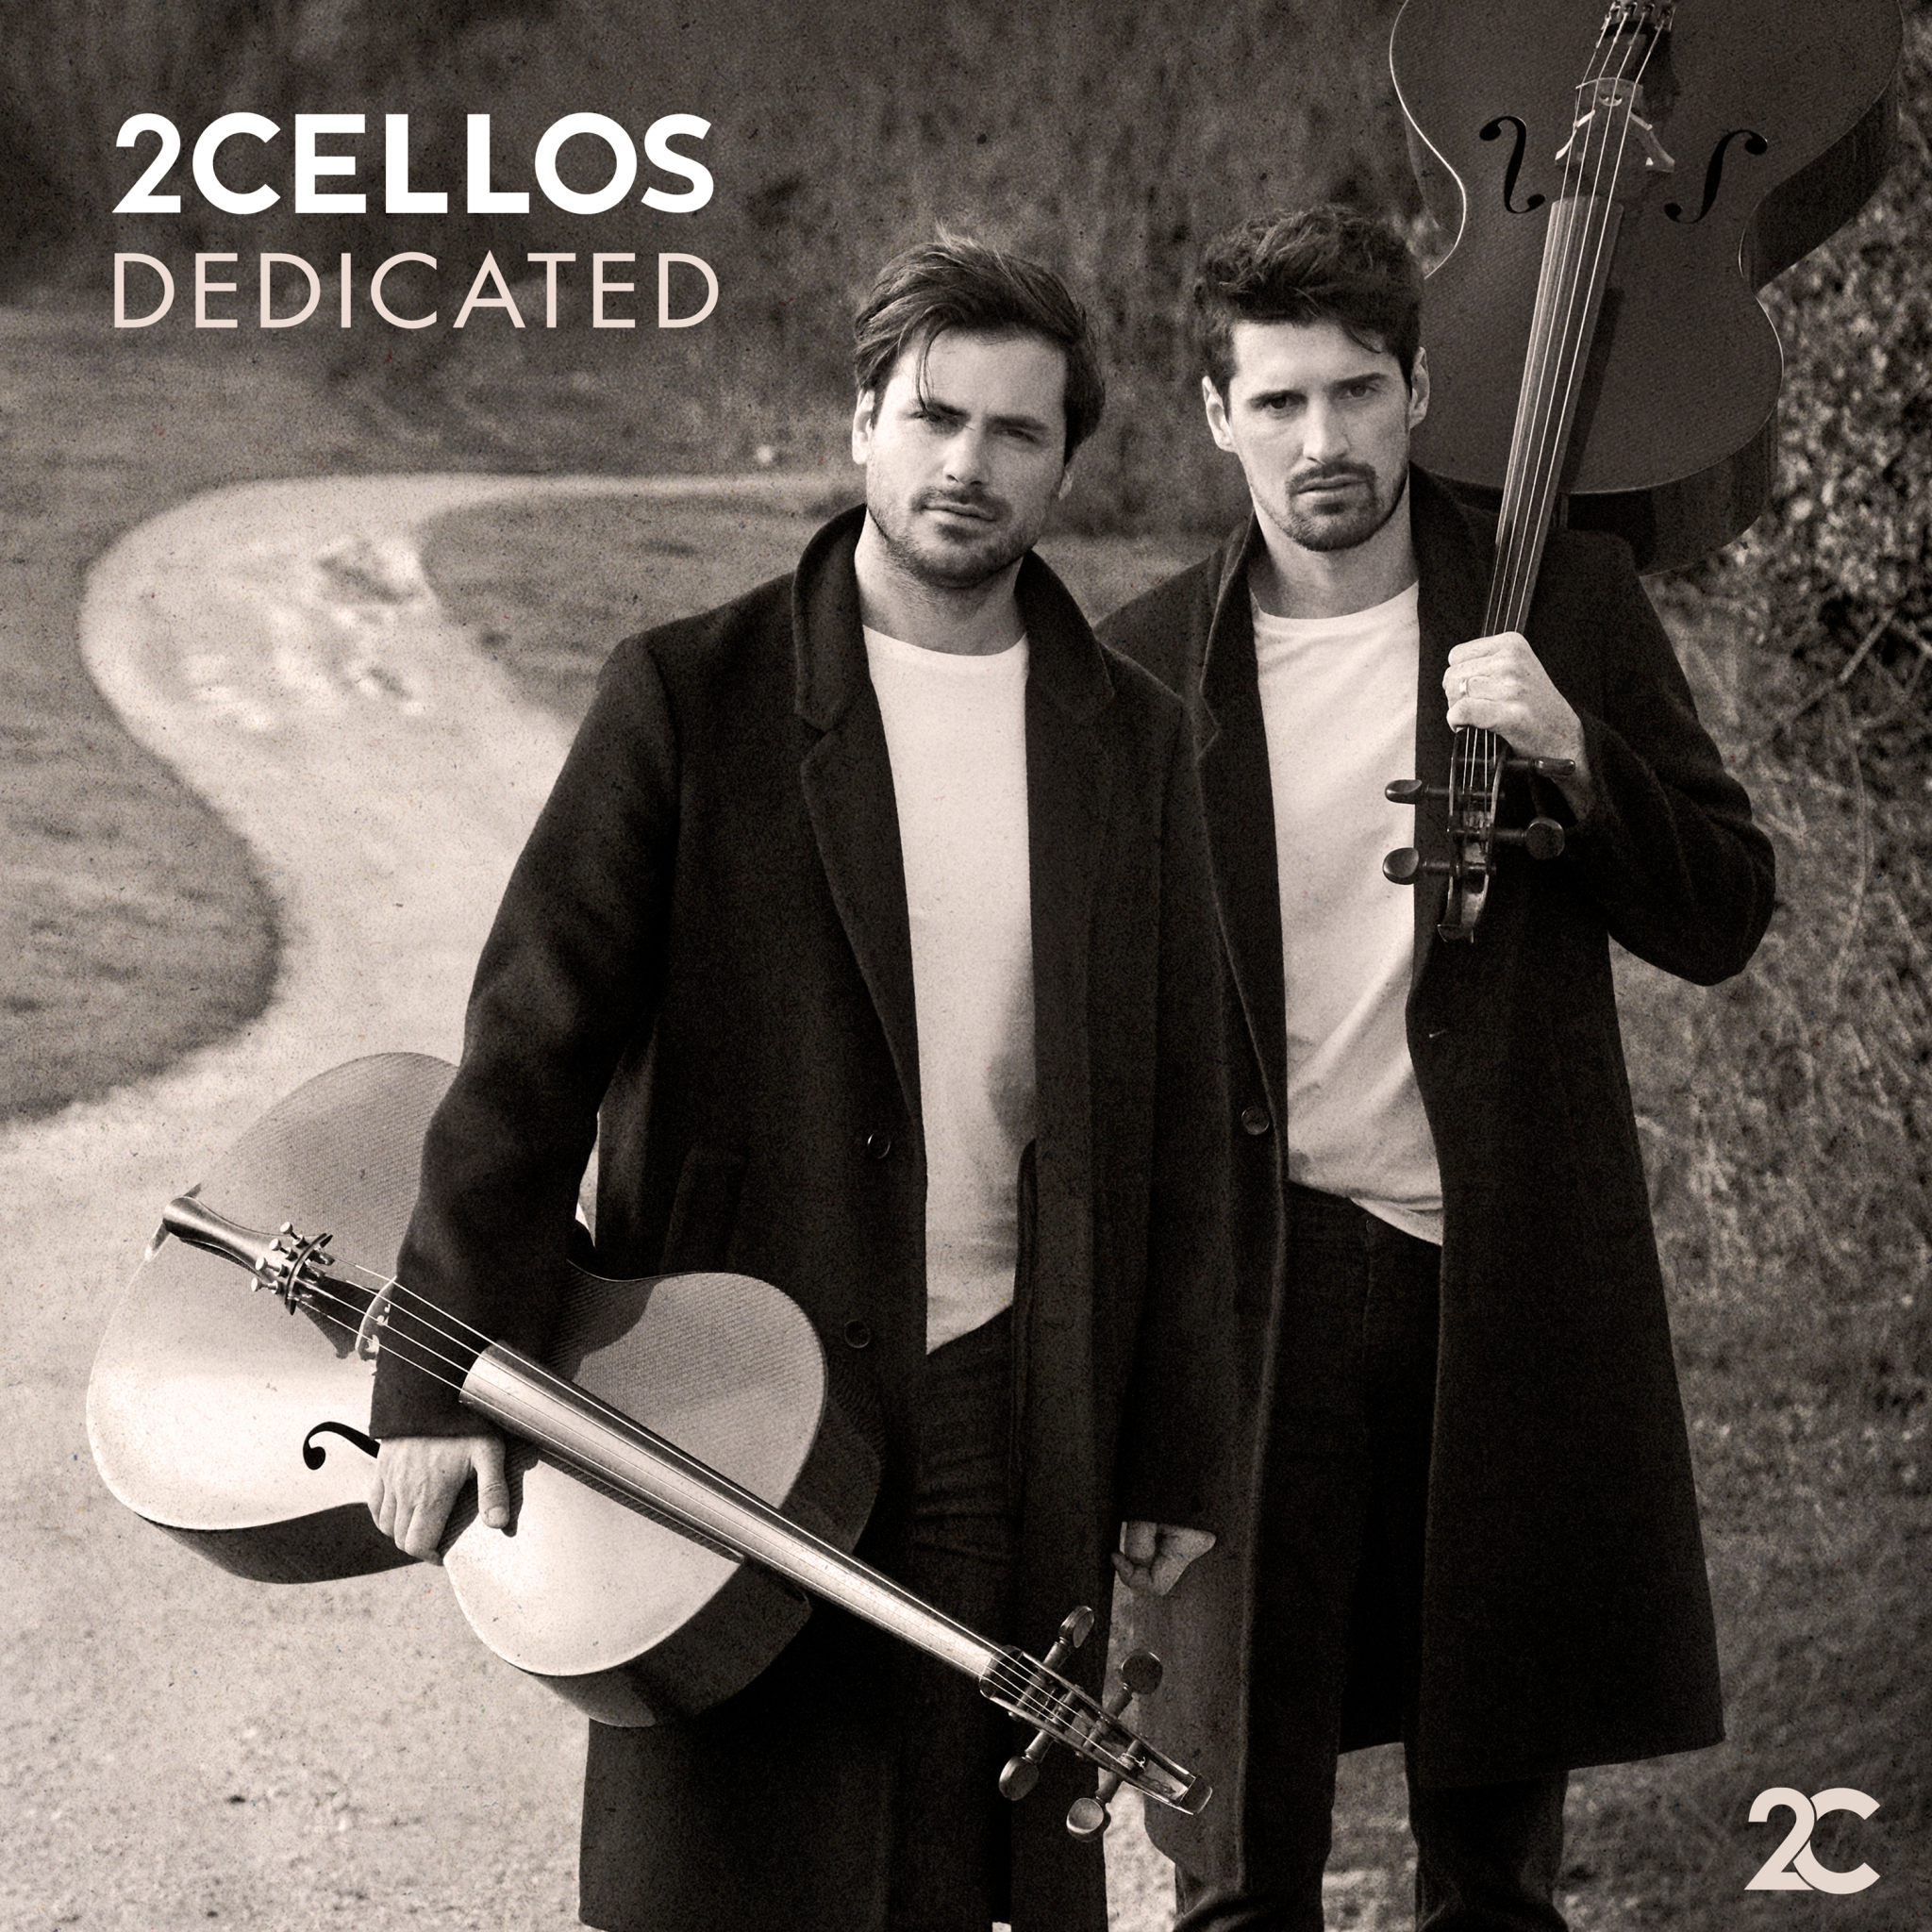 2CELLOS Release New Music + Video; U.S. TOUR Starts March 26